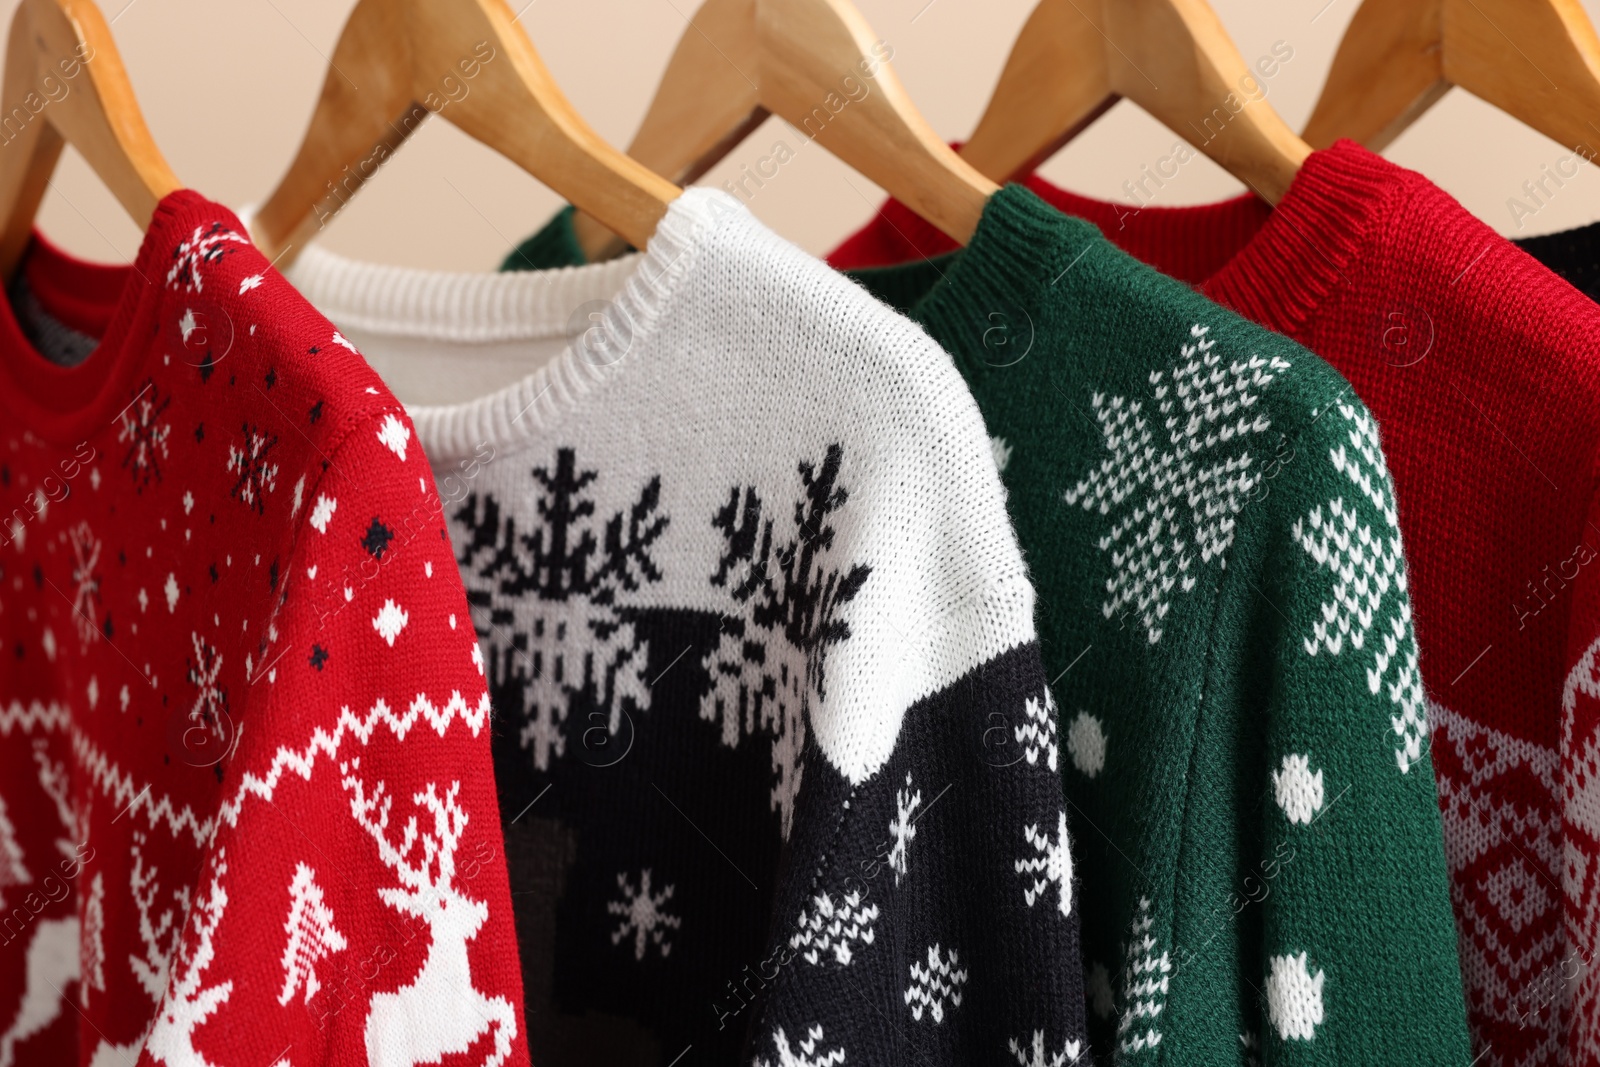 Photo of Different Christmas sweaters hanging on rack against beige background, closeup